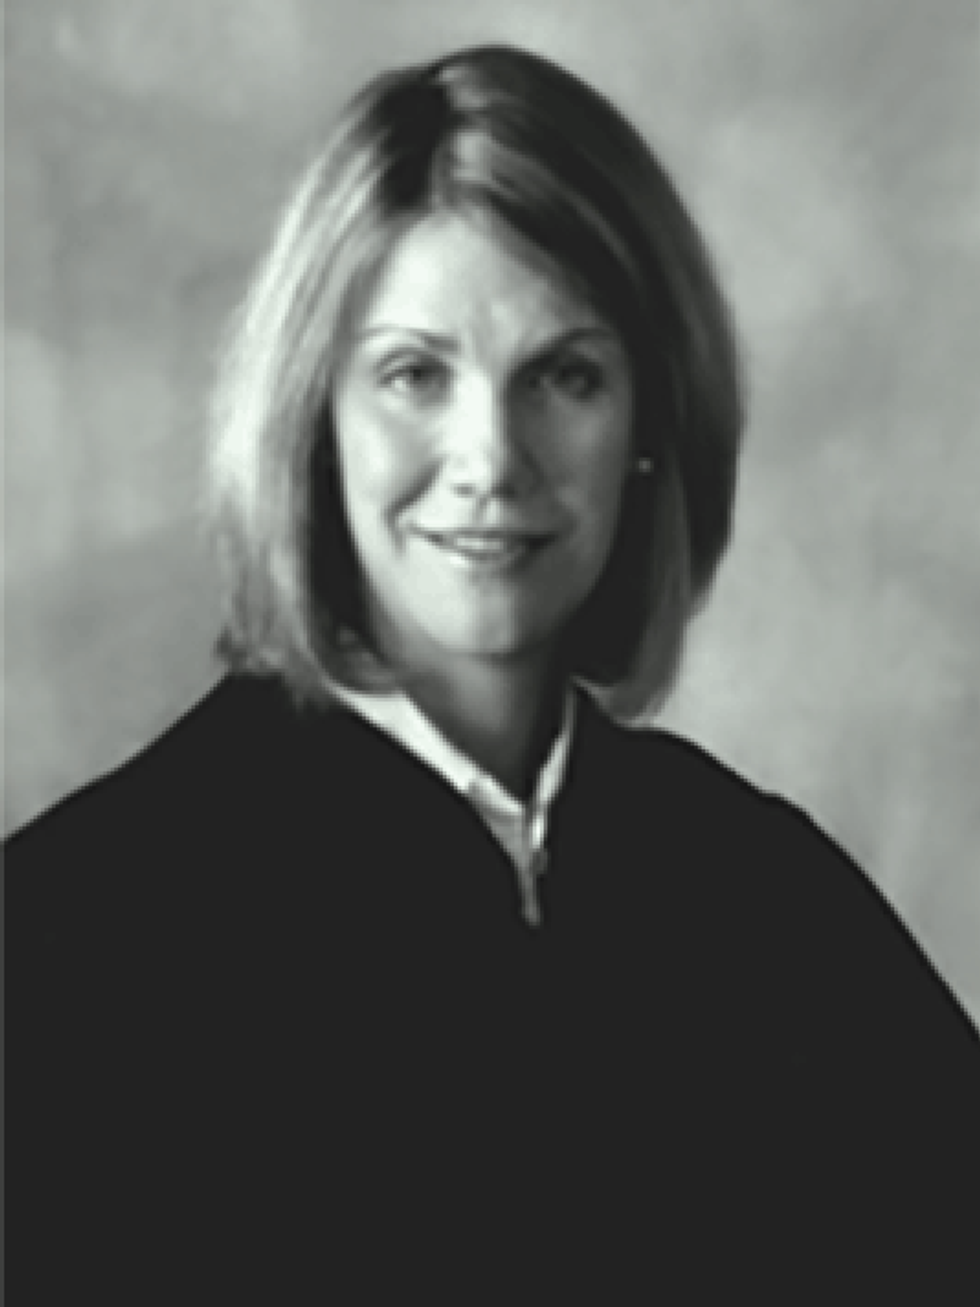 Police: Texas District Judge Shot Outside Her Home